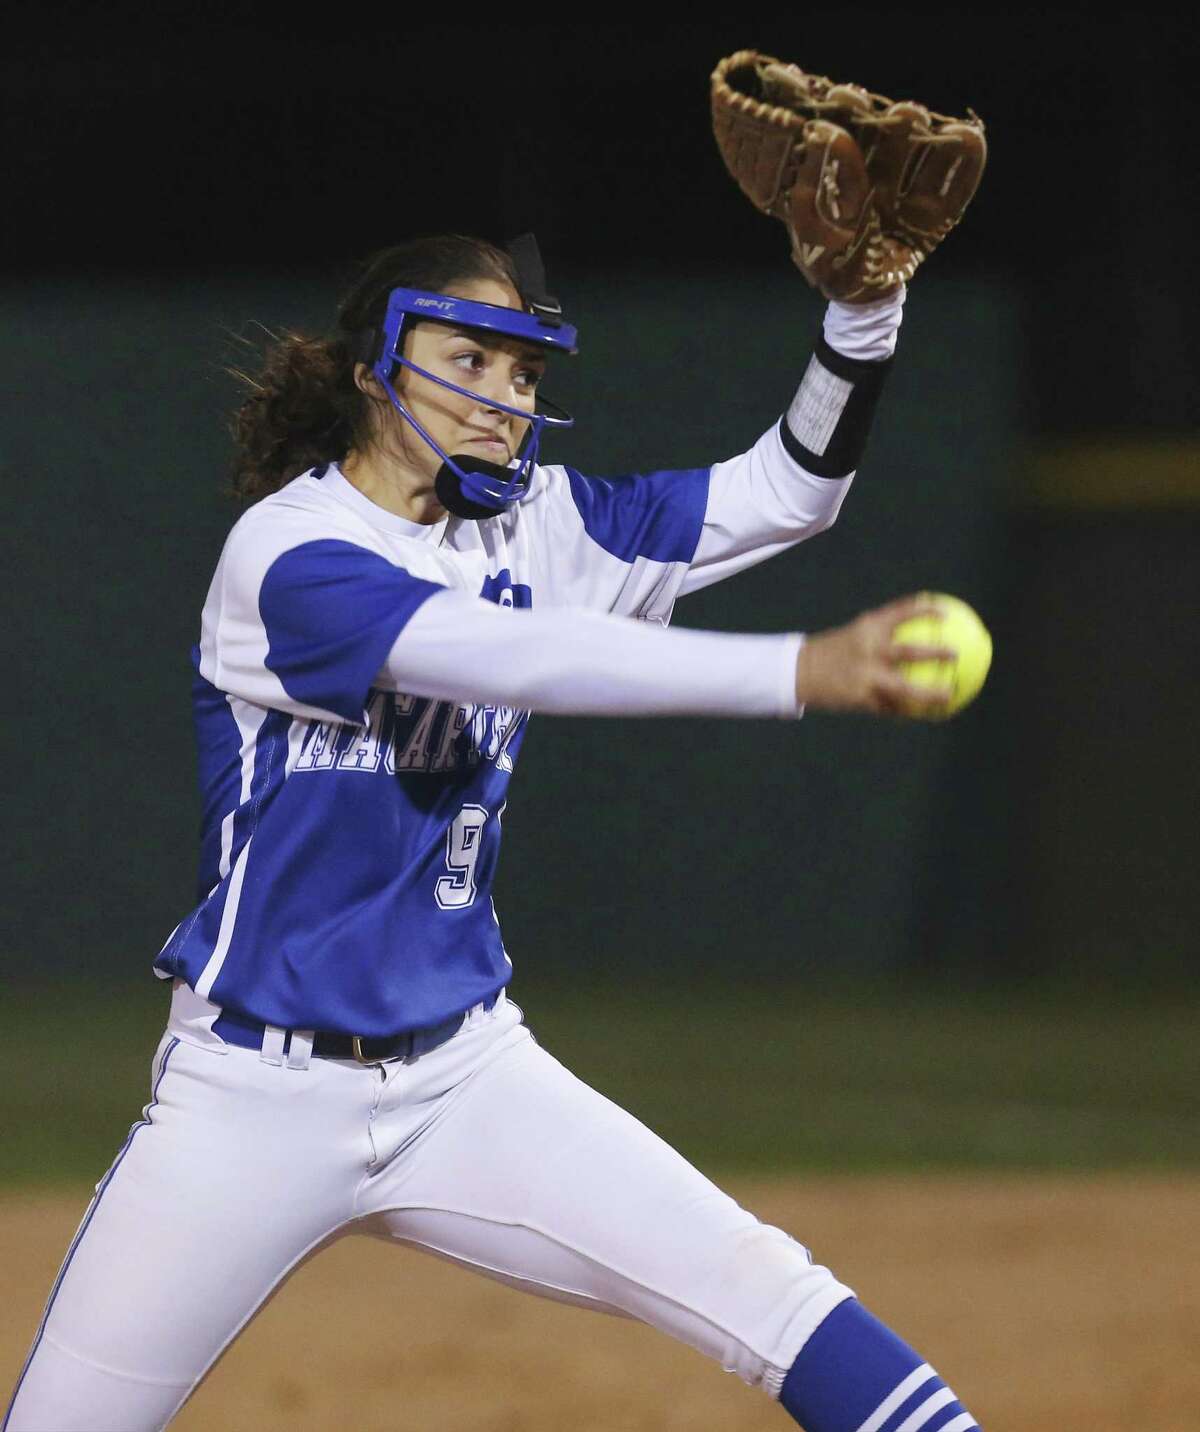 MacArthur pitcher Kylie Scafido pitches against Johnson in girls softball at NEISD Complex's West Field on Tuesday, Mar. 7, 2017. Johnson is No. 1 and MacArthur is No. 2 in Express-News Area rankings. (Kin Man Hui/San Antonio Express-News)